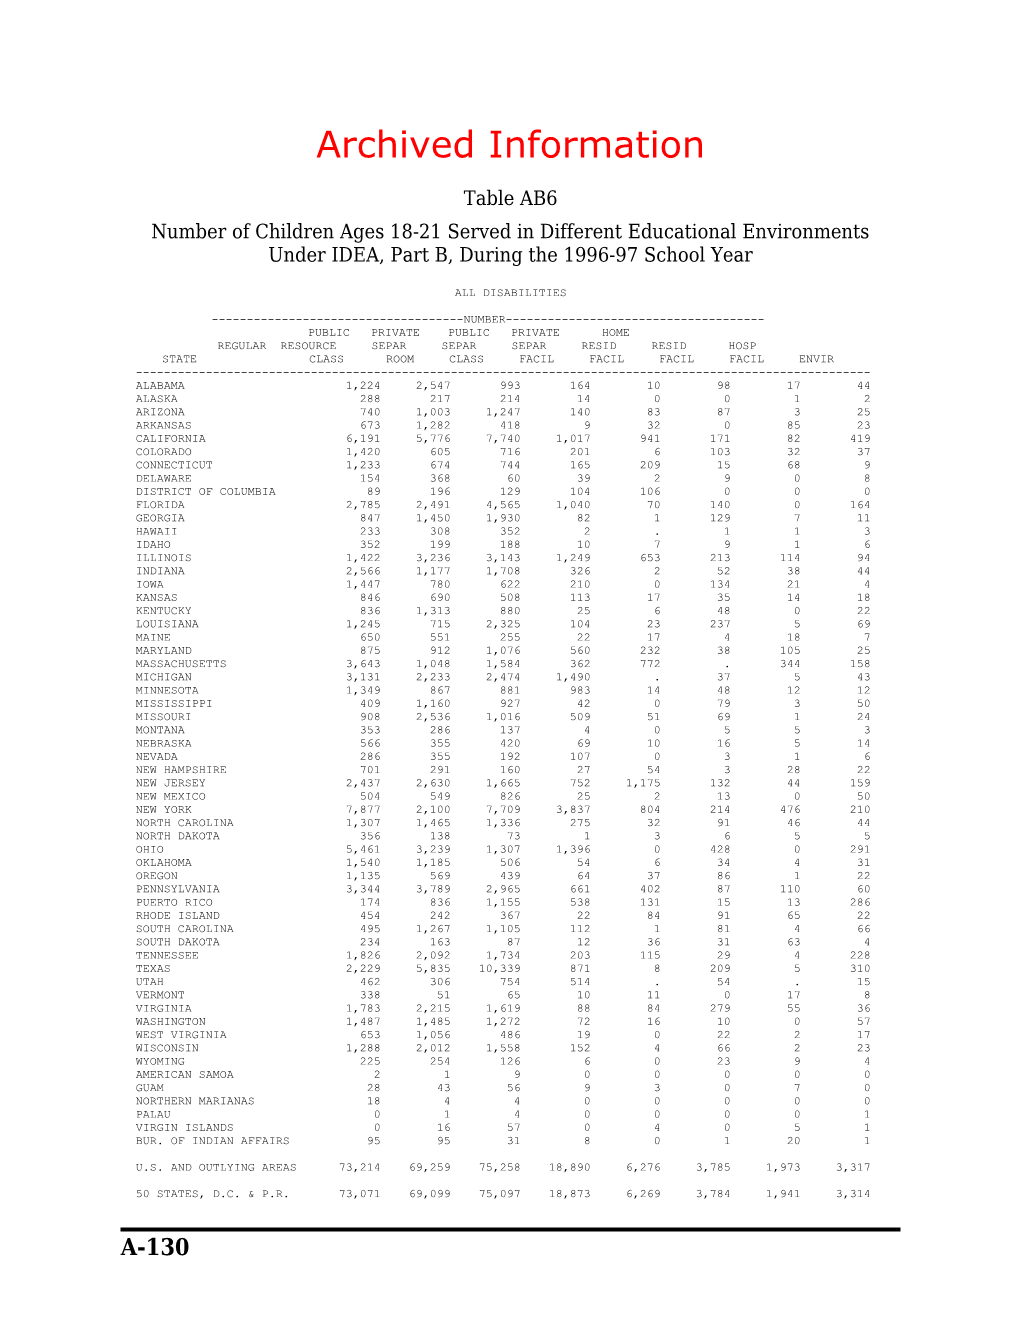 Archived: Additional Data Tables: Twenty First Annual Report to Congress on the Implementation